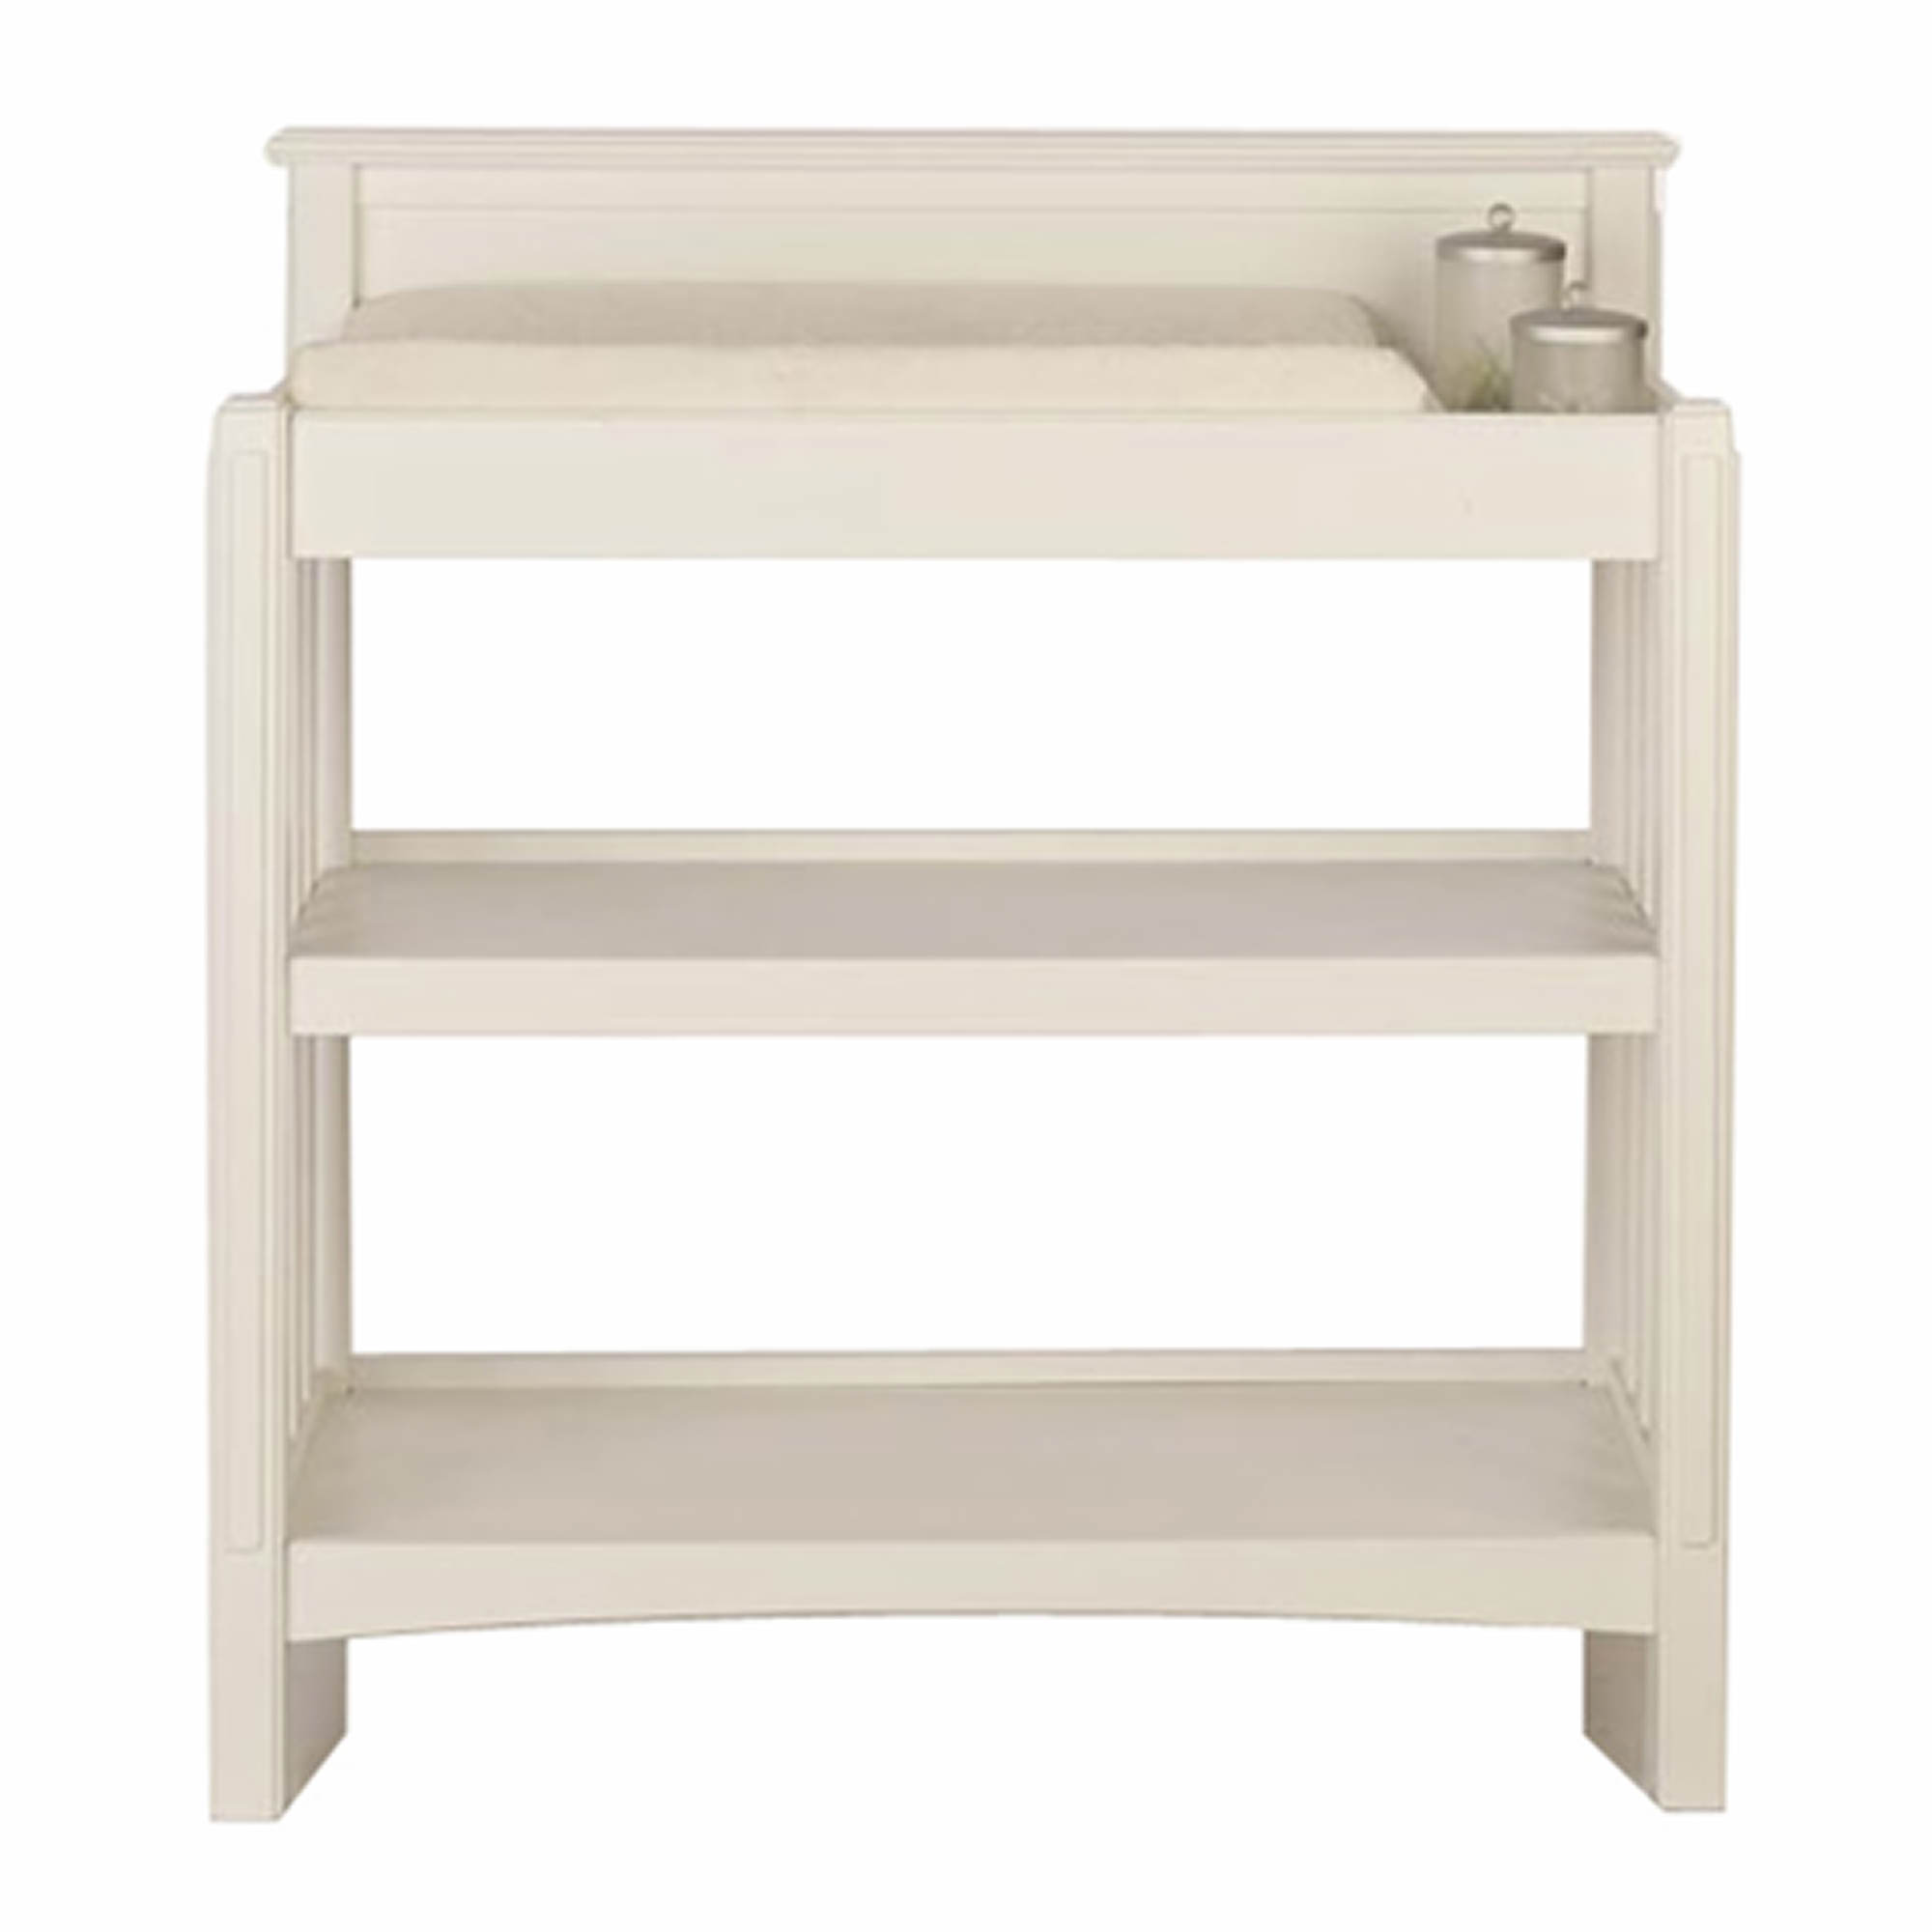 Carter's Sleep Haven Changing Table White BJs WholeSale Club